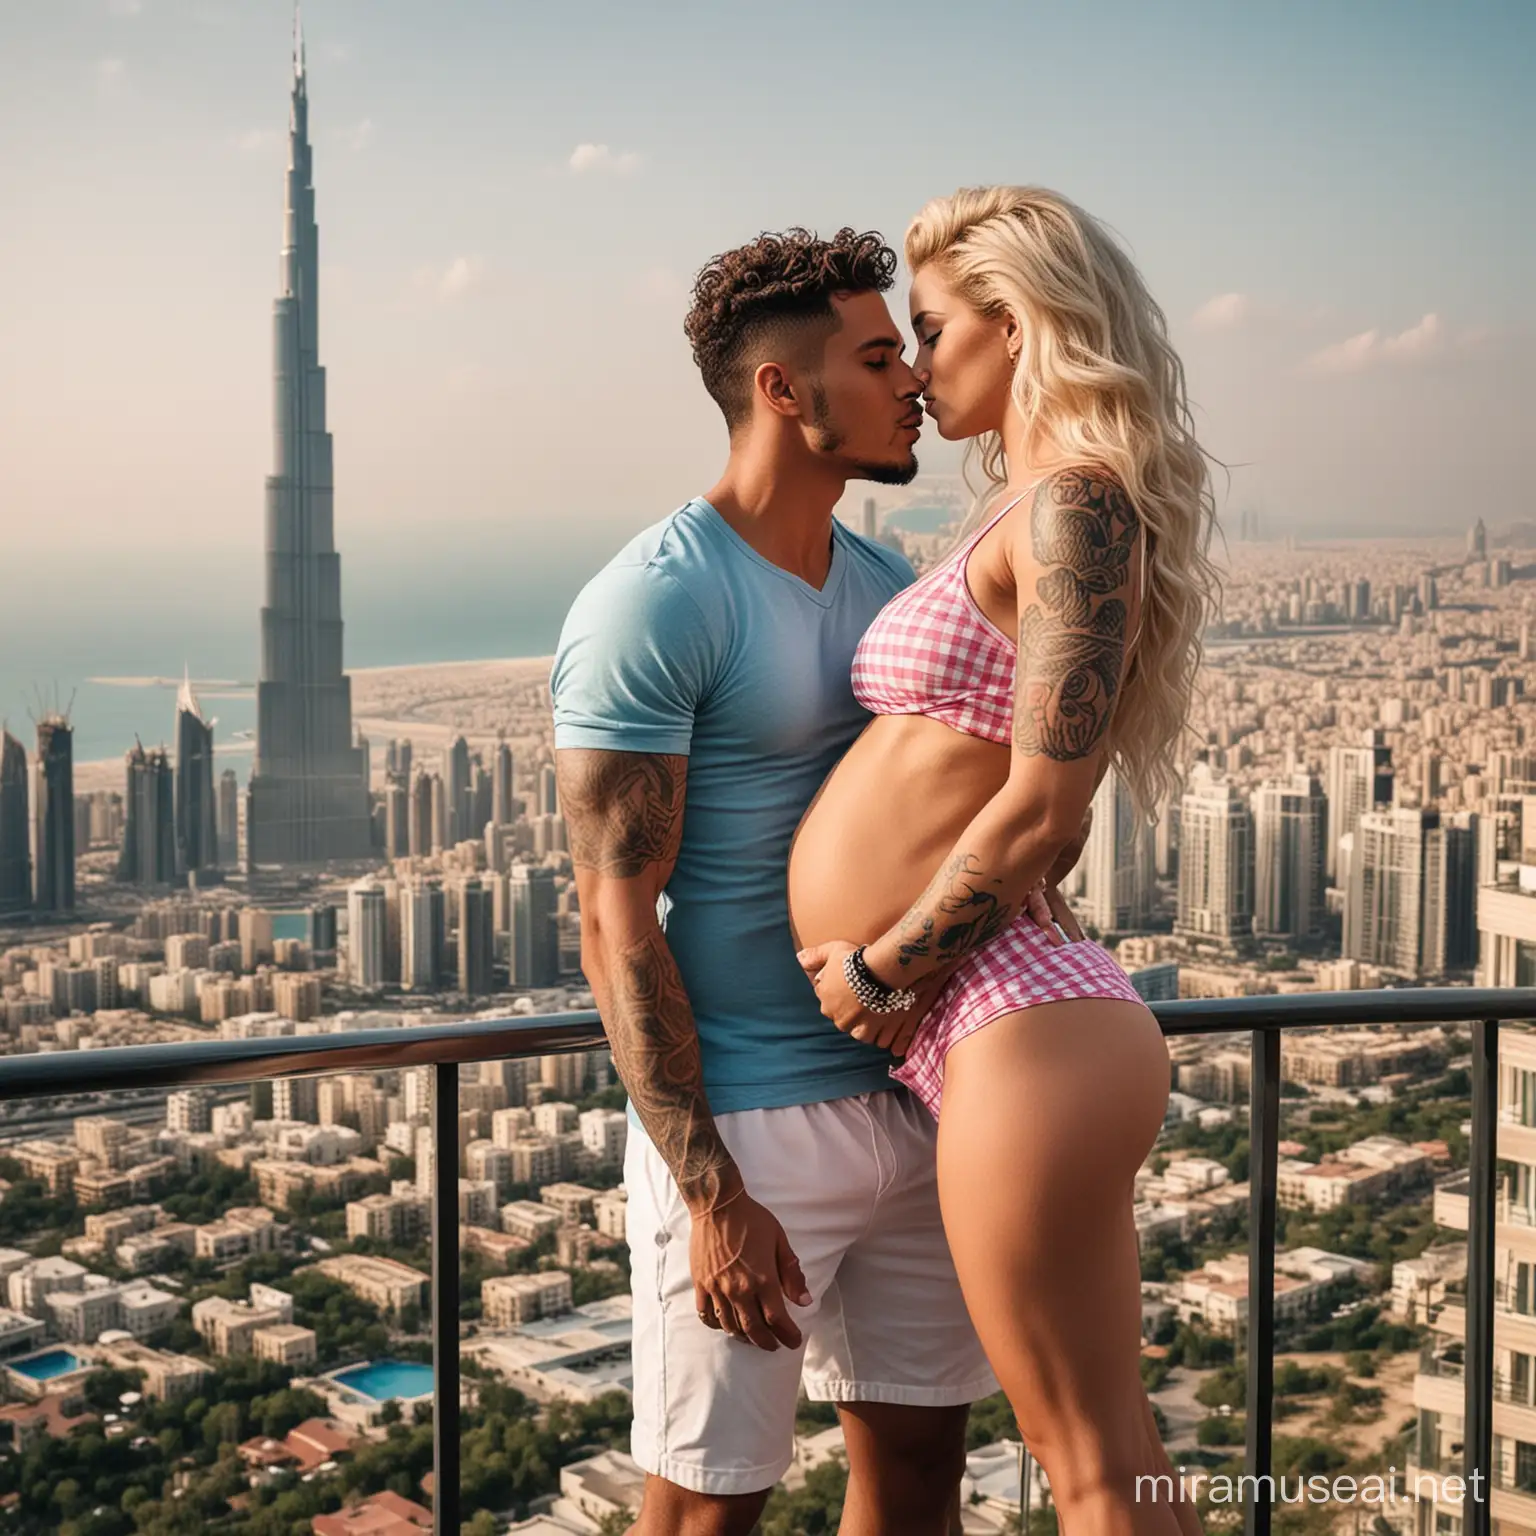 Muscular Football Player and Pregnant Queen Kissing in Luxurious Mountain Villa Overlooking Burj Khalifalike Skyscraper